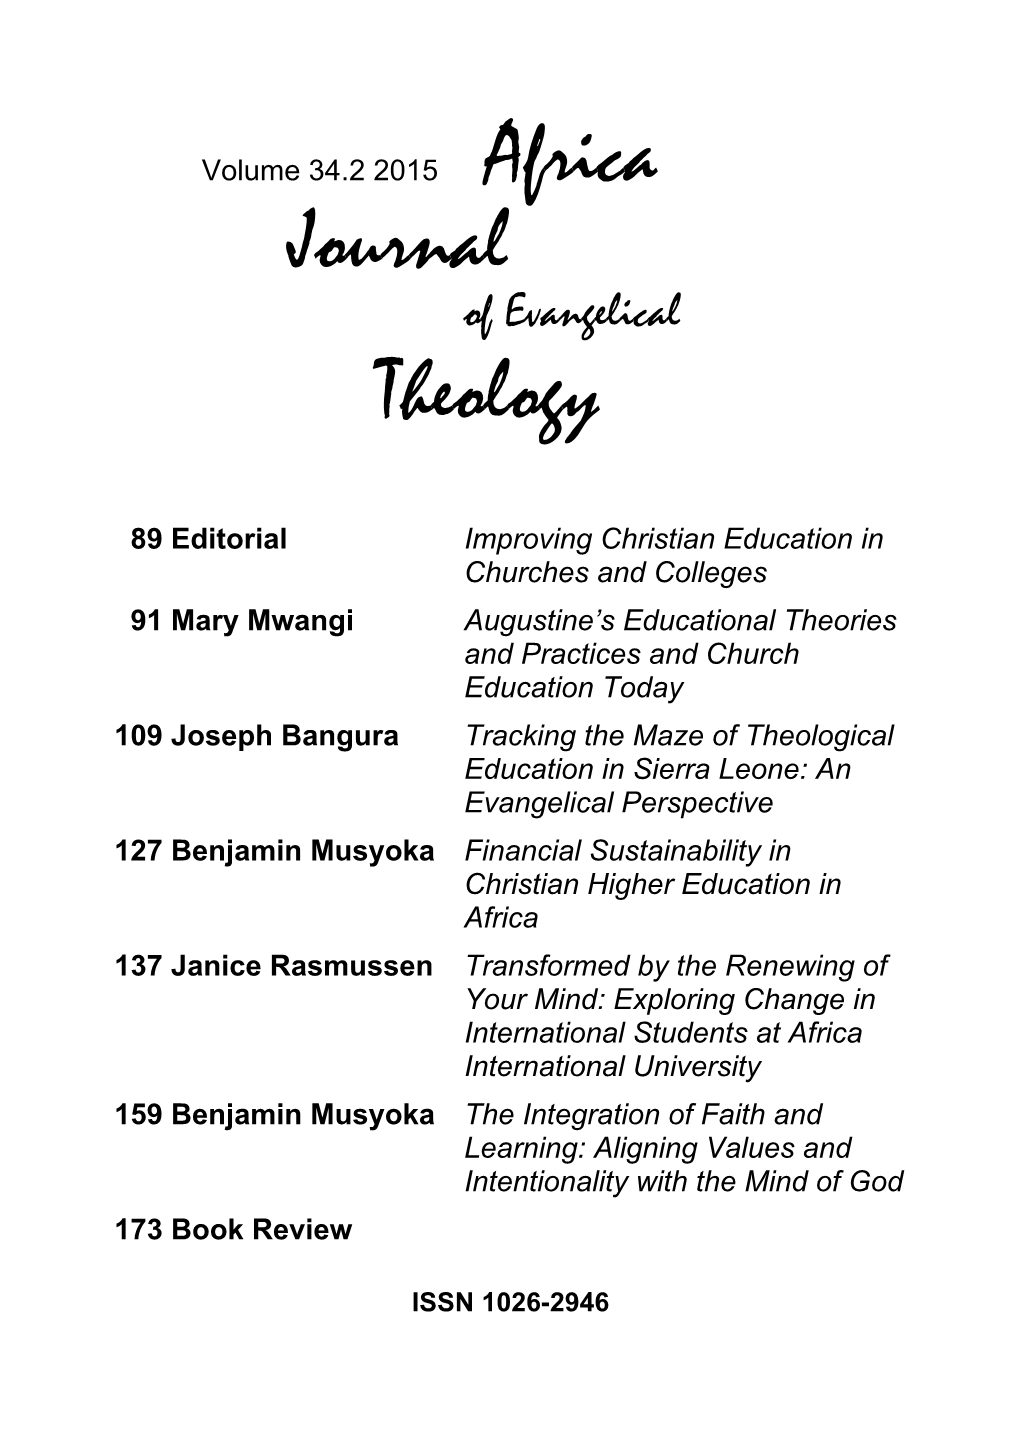 "Tracking the Maze of Theological Education in Sierra Leone: an Evangelical Perspective," Africa Journal